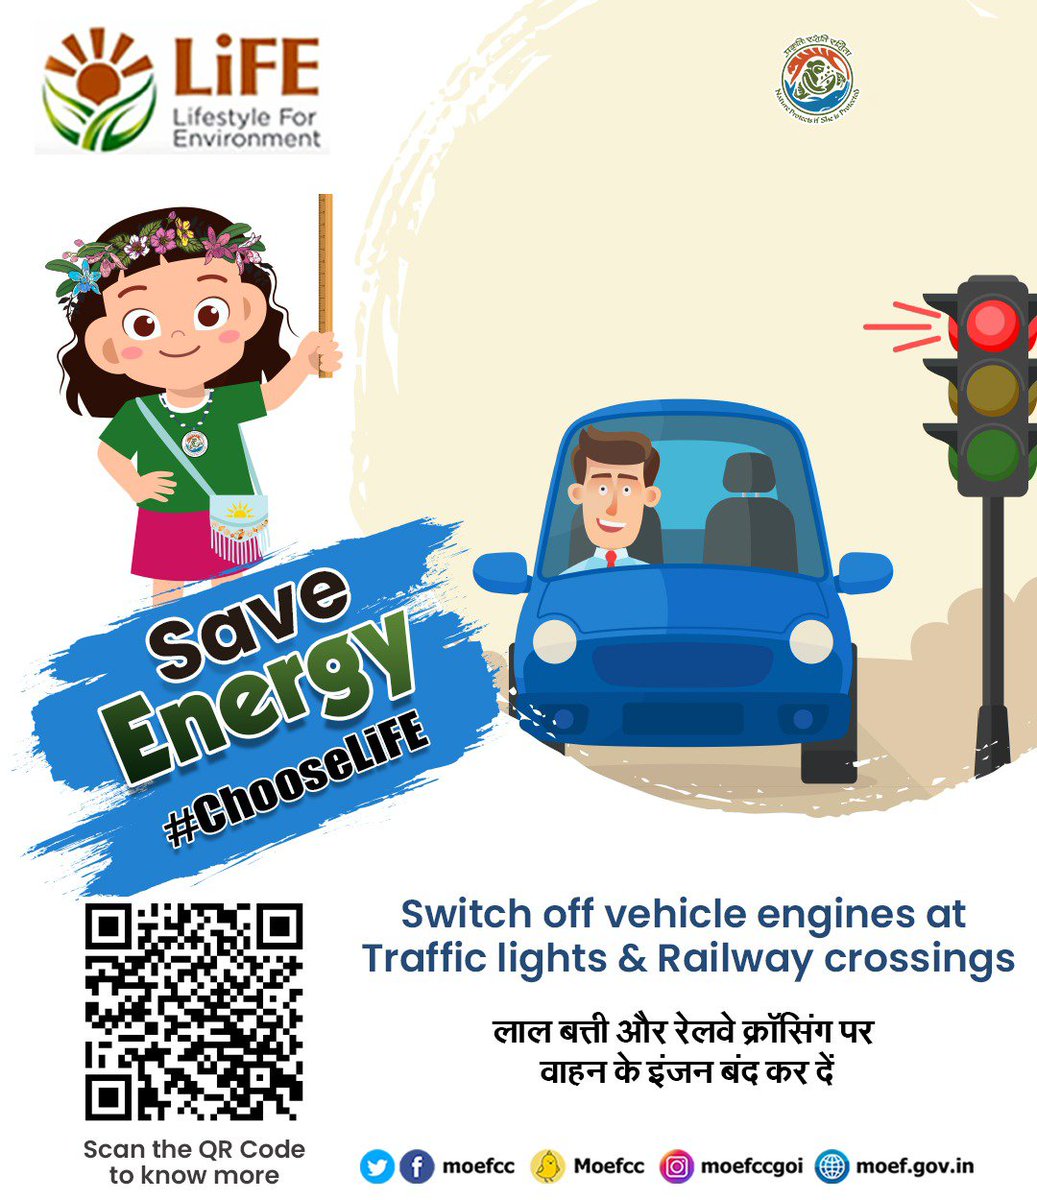 🚦 Turn off your vehicle engines at traffic lights & railway crossings for safety! Let's prioritize life over haste. Join #MissionLiFE #ChooseLiFE to ensure responsible driving habits. @moefcc @MIB_India #RoadSafety #TrafficAwareness #SaveEnergy #FollowRules #PublicSafety 🛑🚗🚦